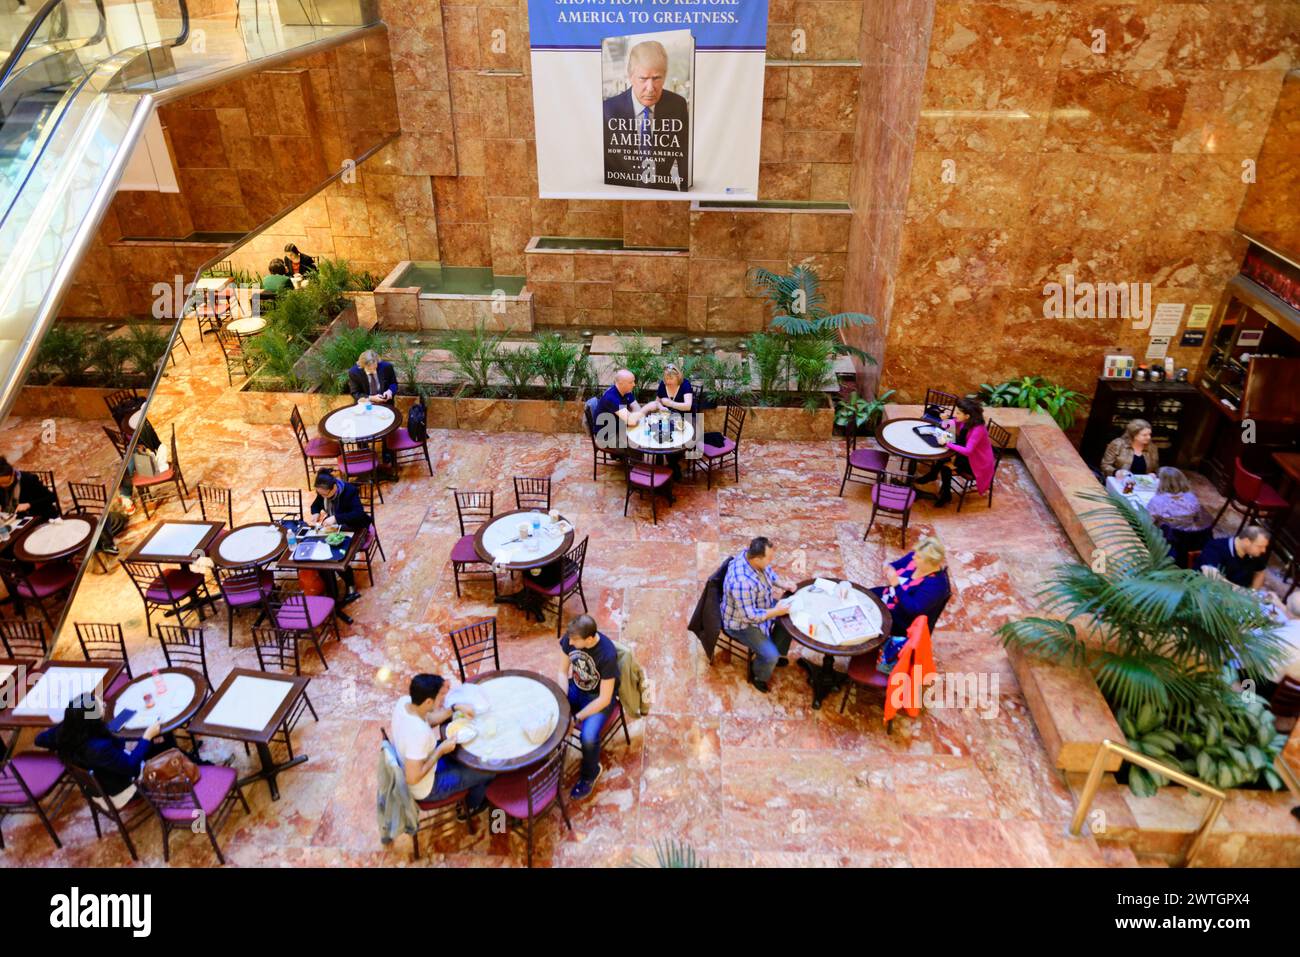 Pompous atrium of Trump Tower, people sitting in a cafe with escalators next to them, superimposed by a poster, Manhattan, New York City, New York Stock Photo